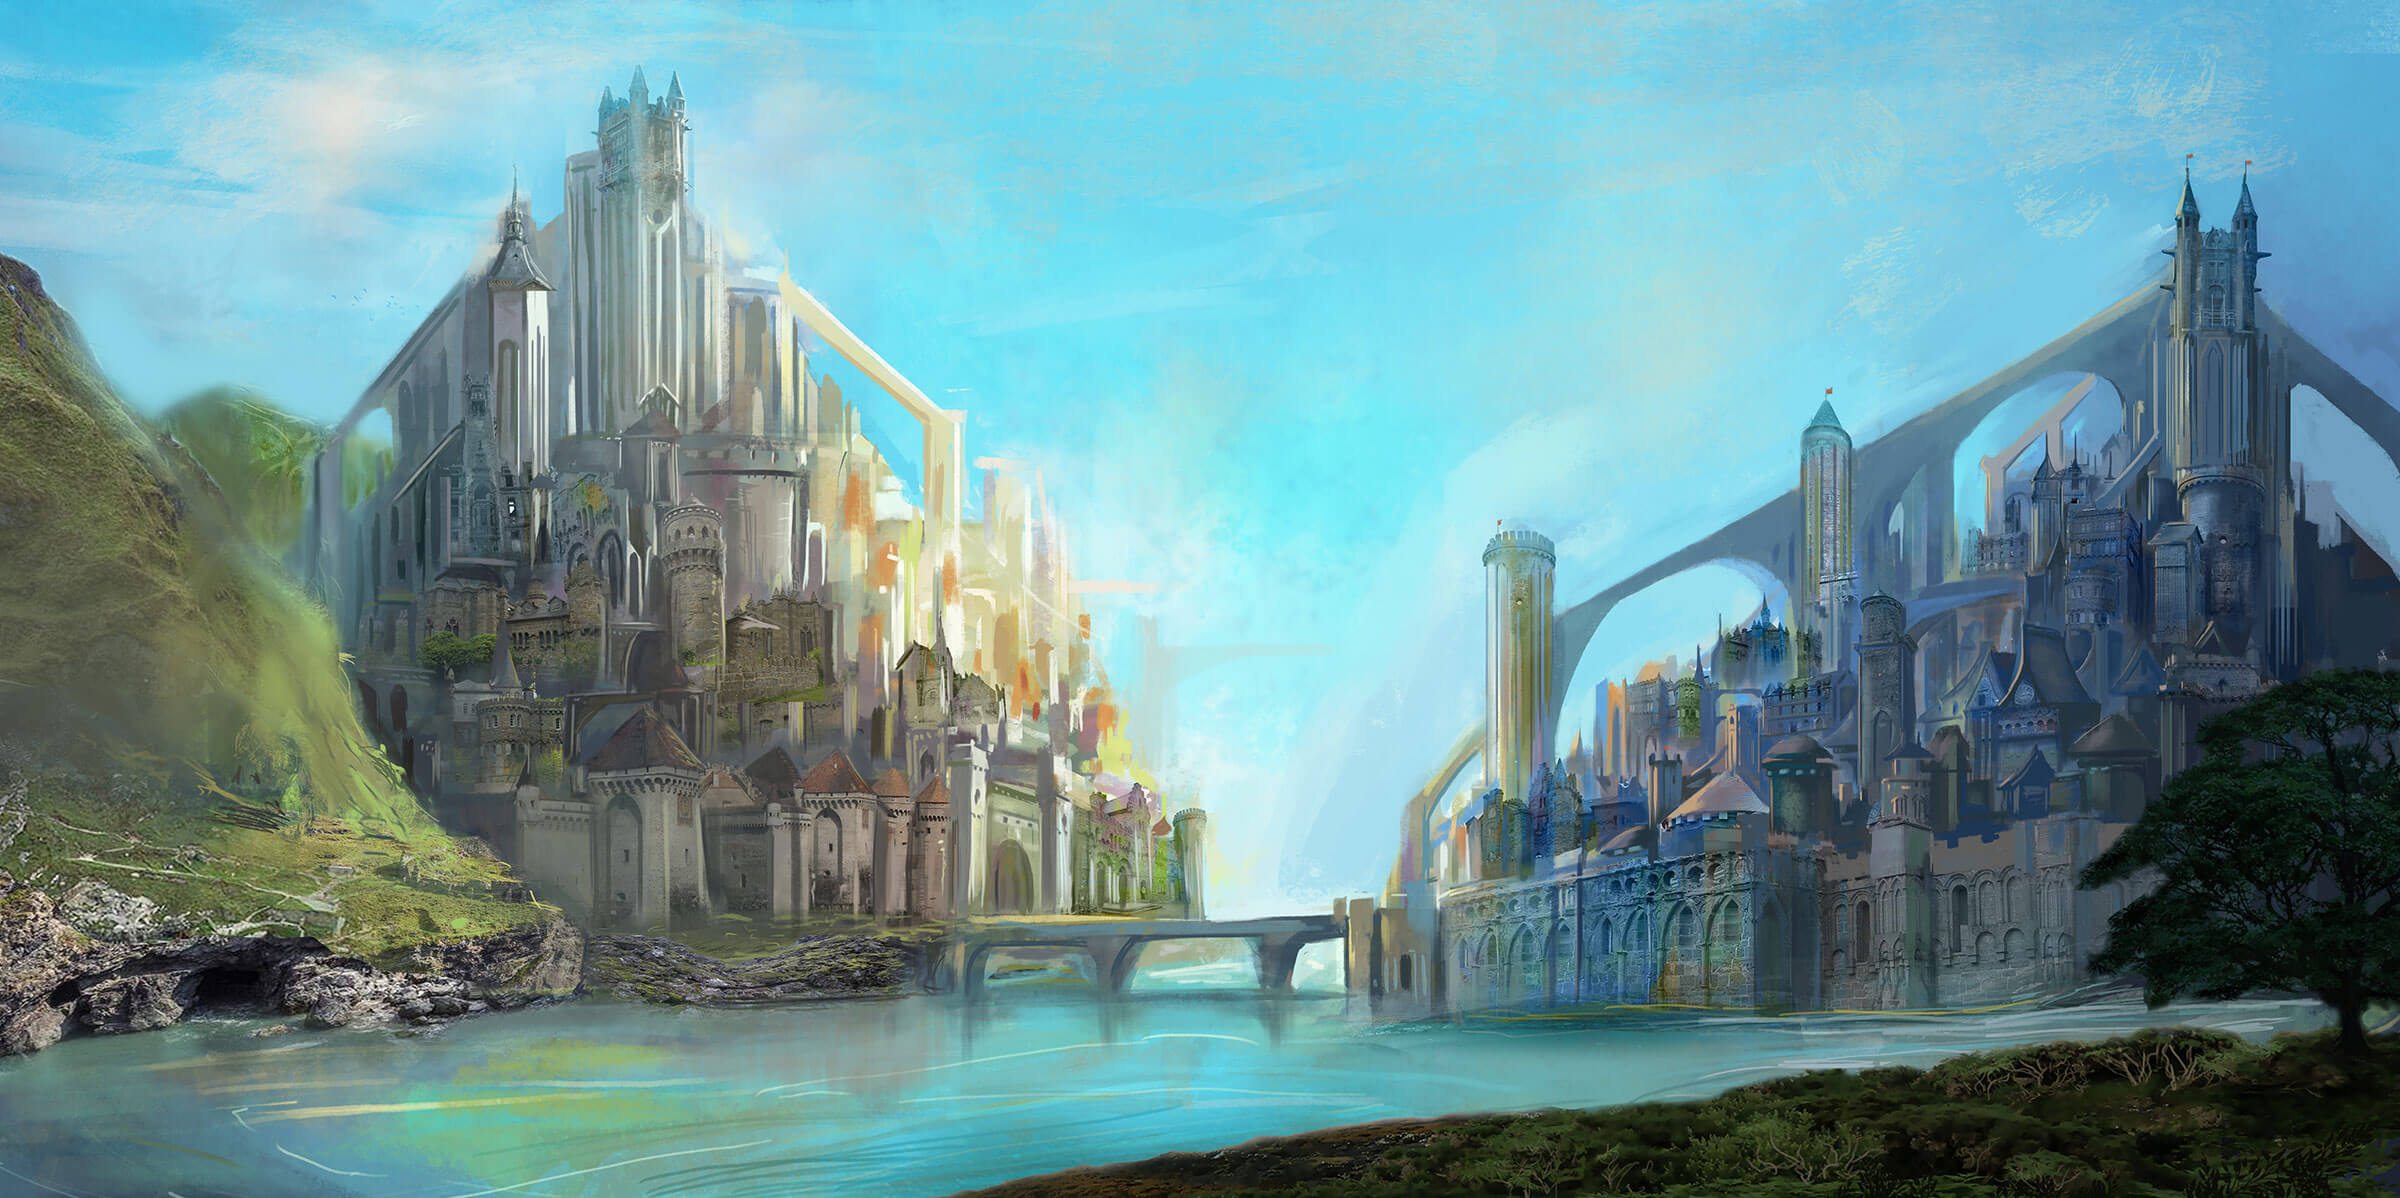 Two high-fantasy-style cities are connected by a single bridge across the river separating them.